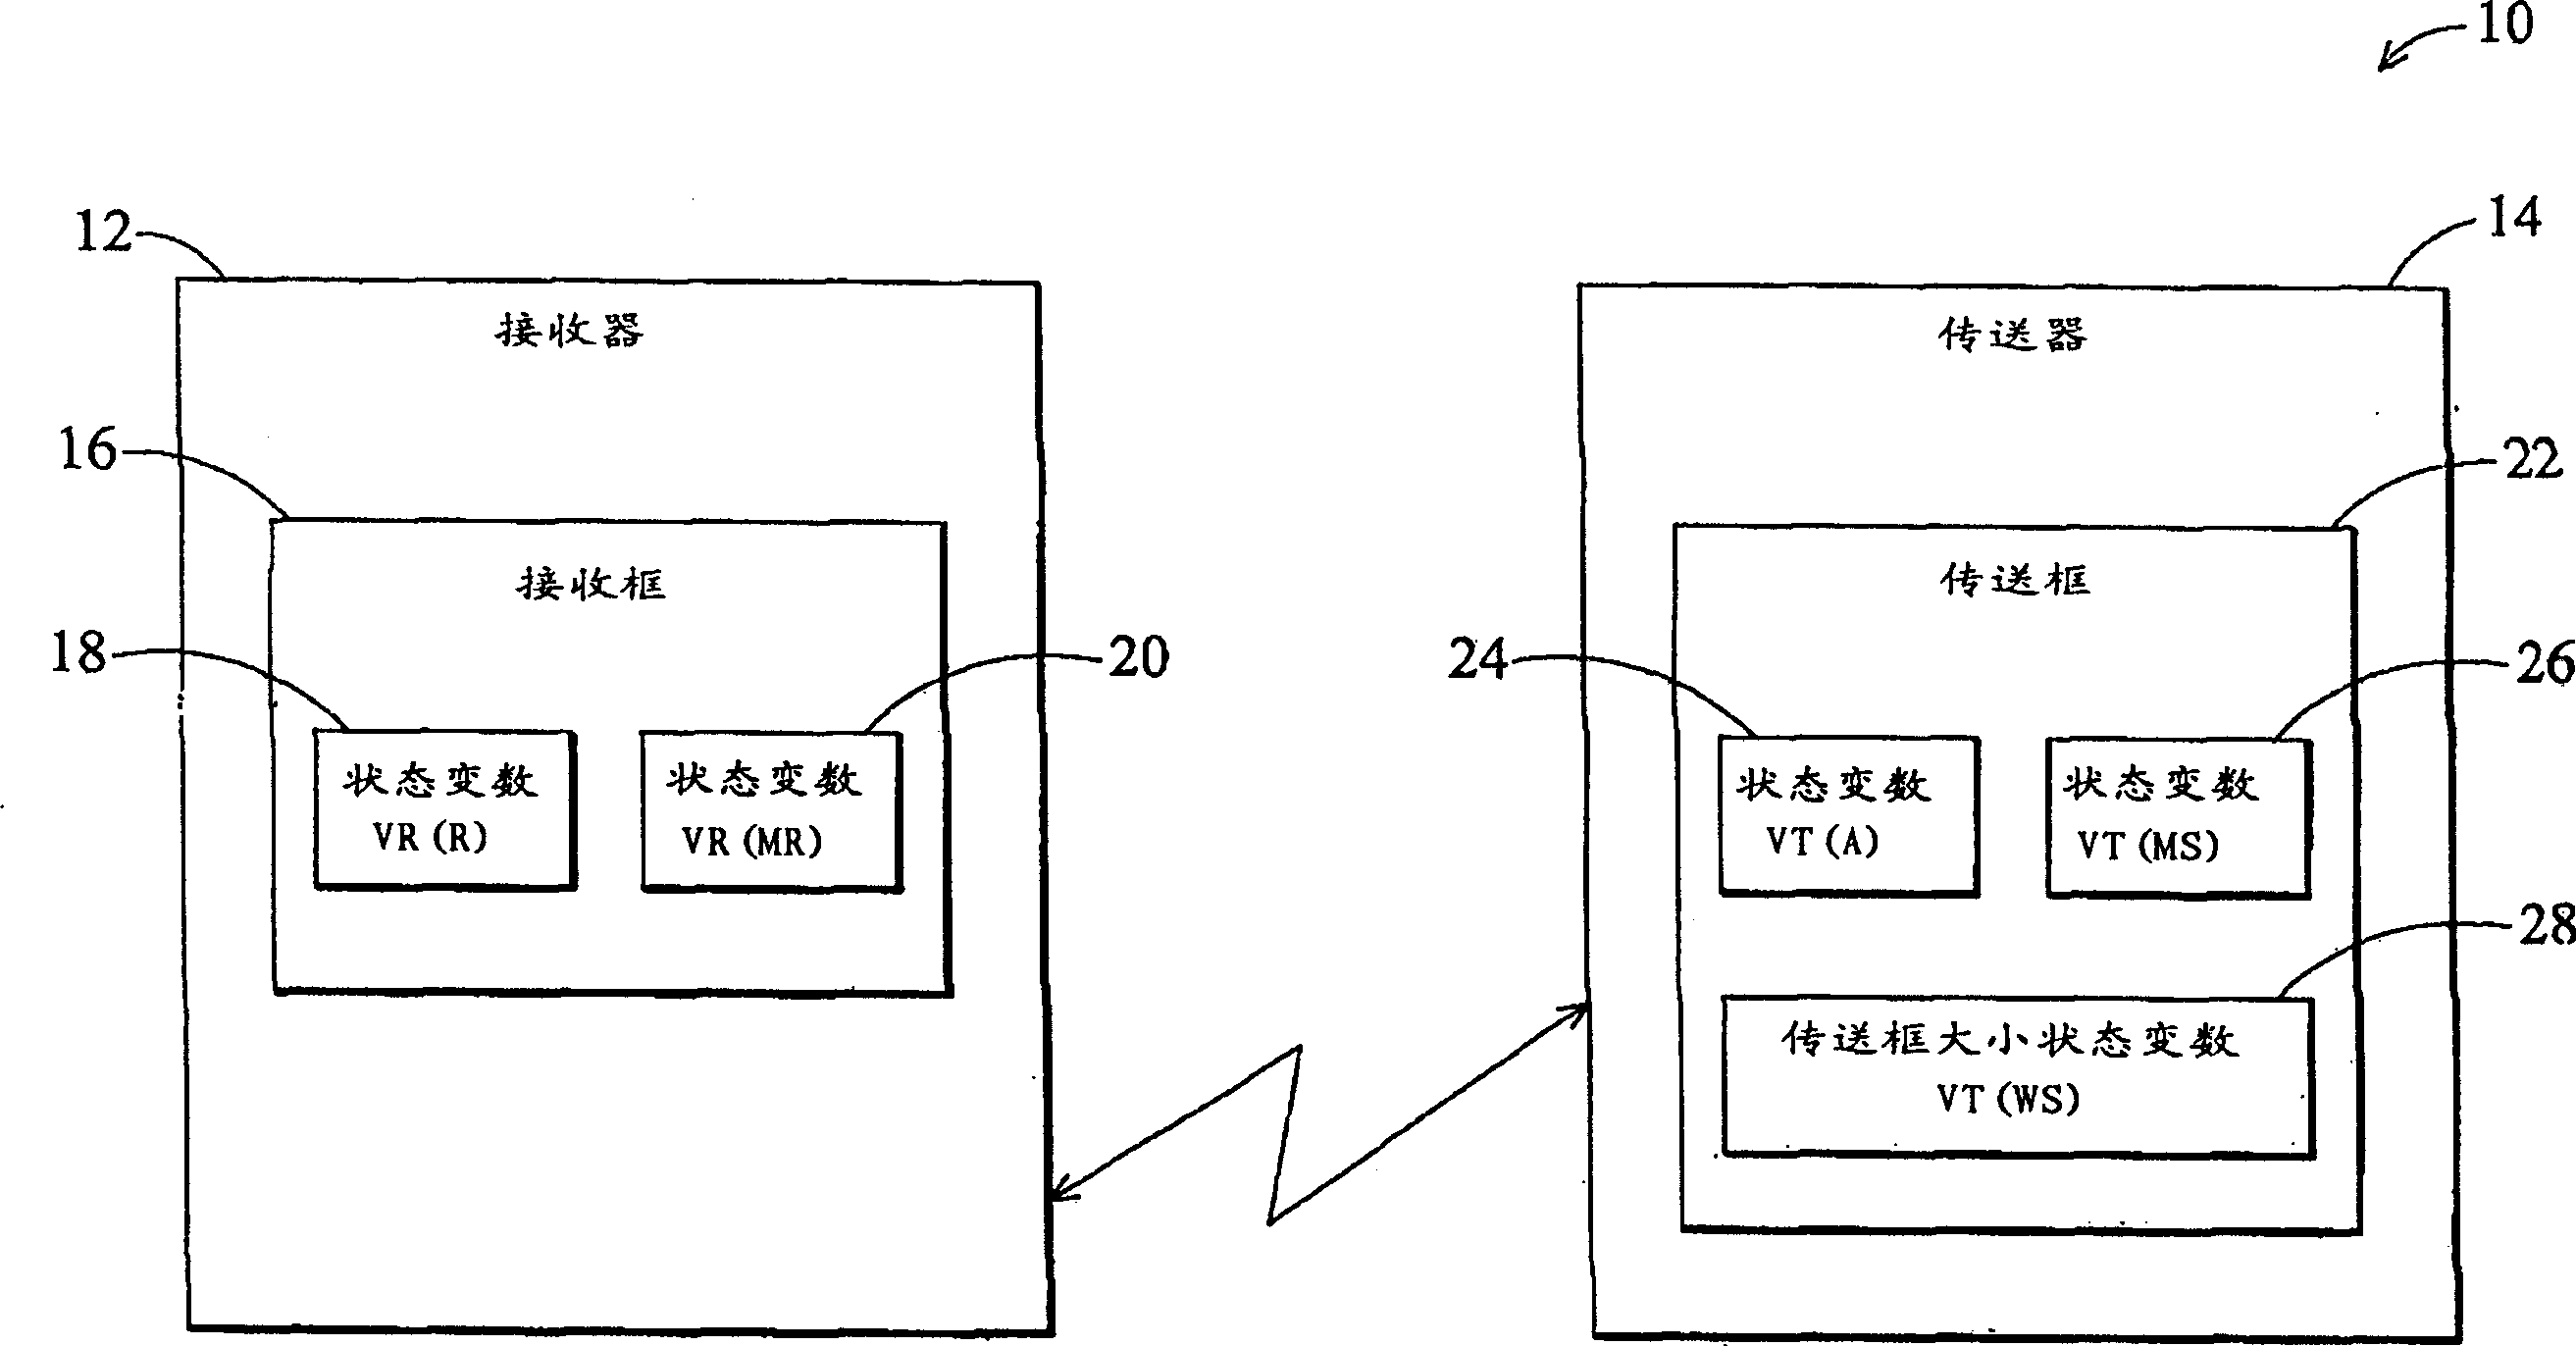 Method of controlling a receiver and a transmitter to handle a transmission window size change procedure